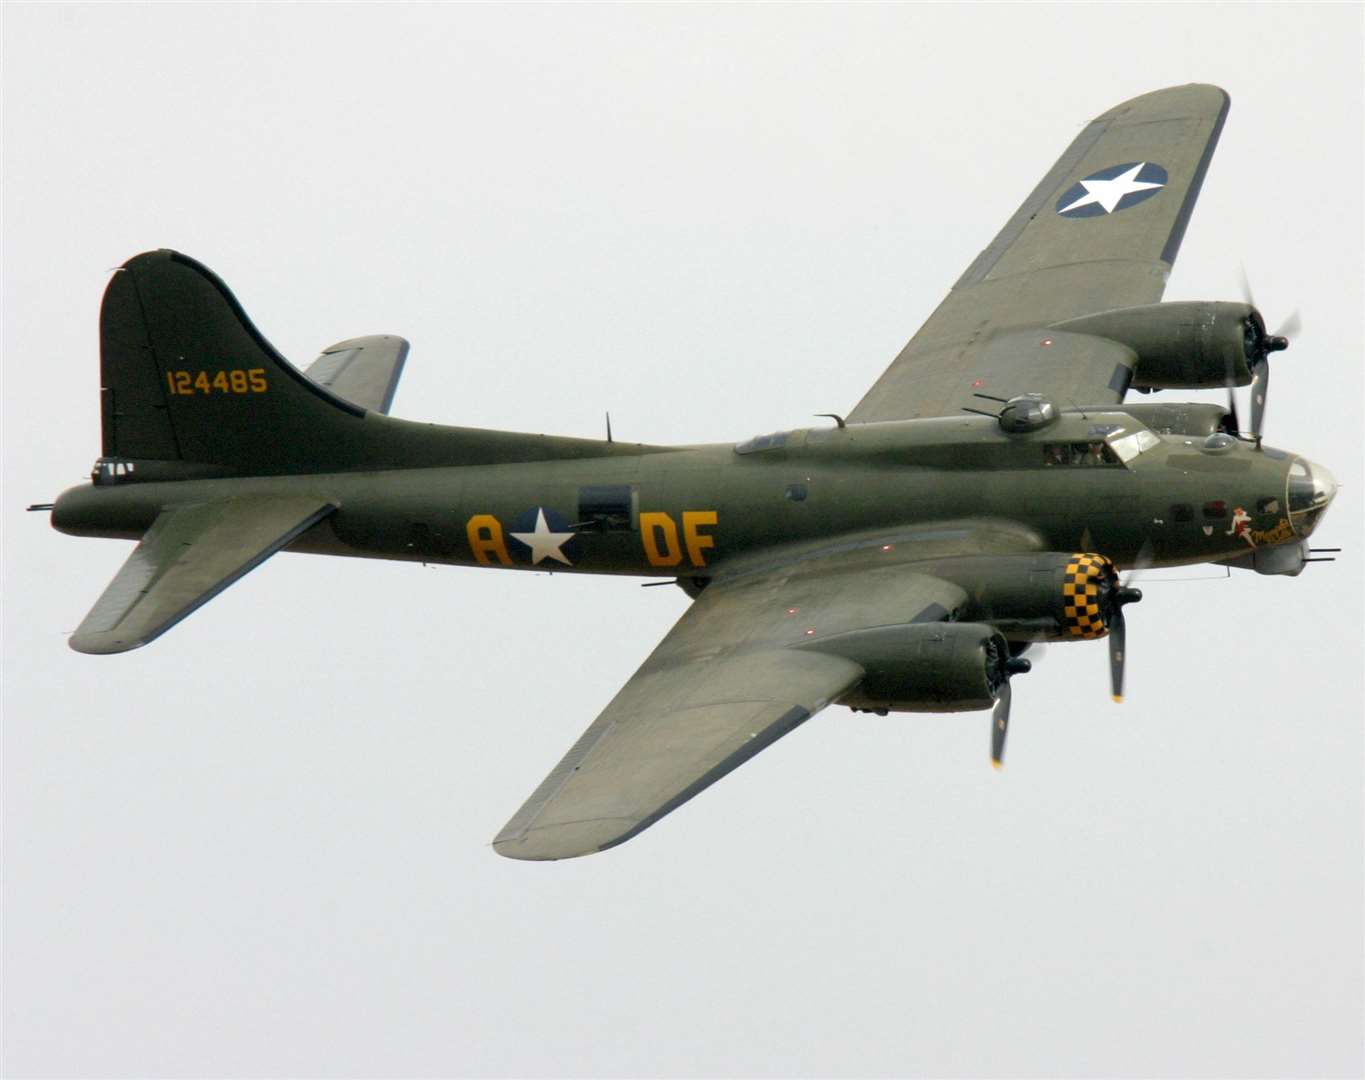 B-17 flying fortress 'The Sally-B' at the last airshow in 2006. Picture: Reflections